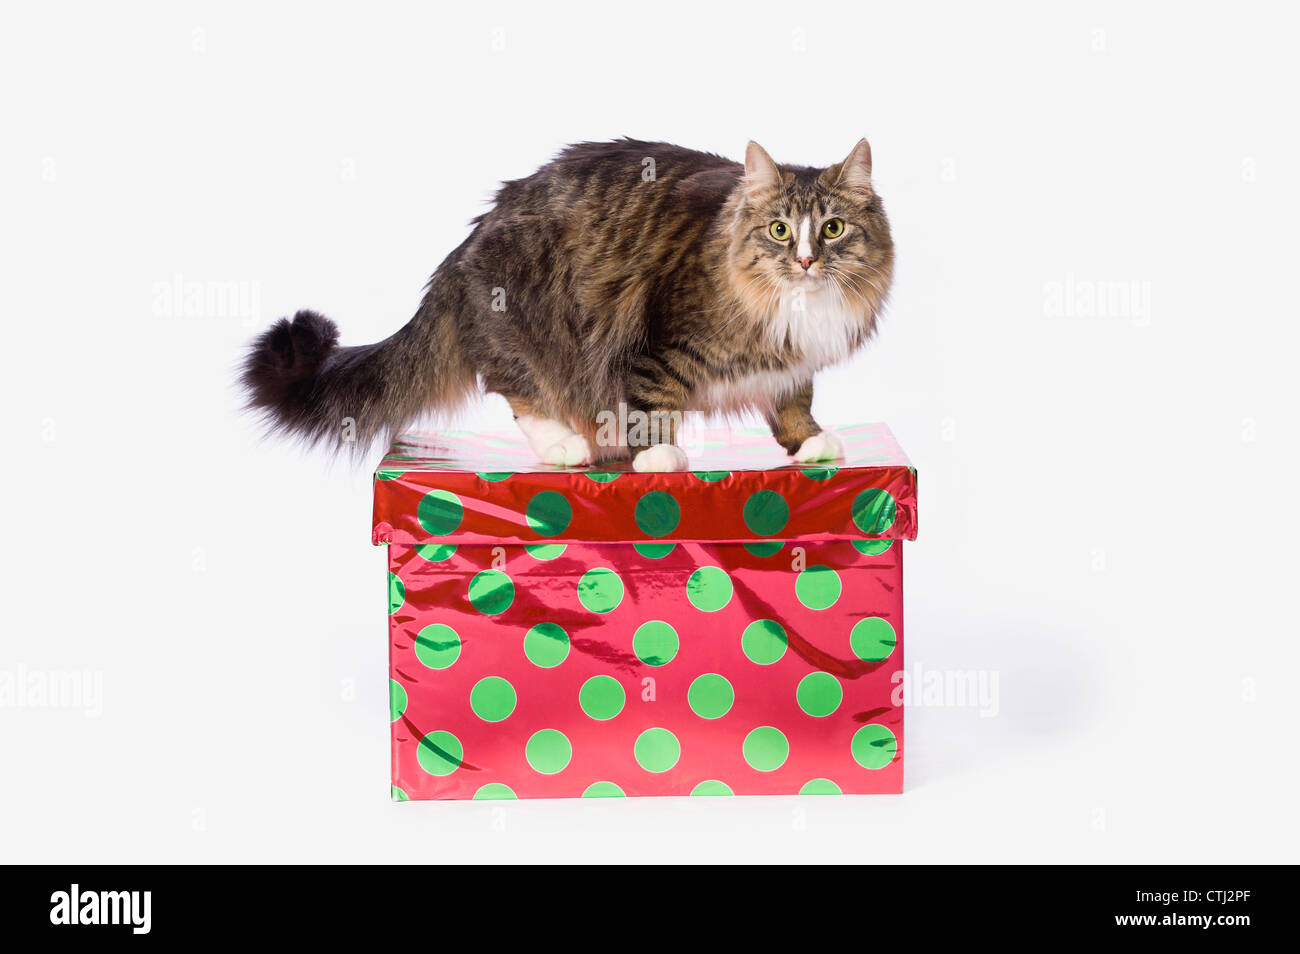 A Tabby Cat On A Red And Green Polka Dot Gift Box Stock Photo